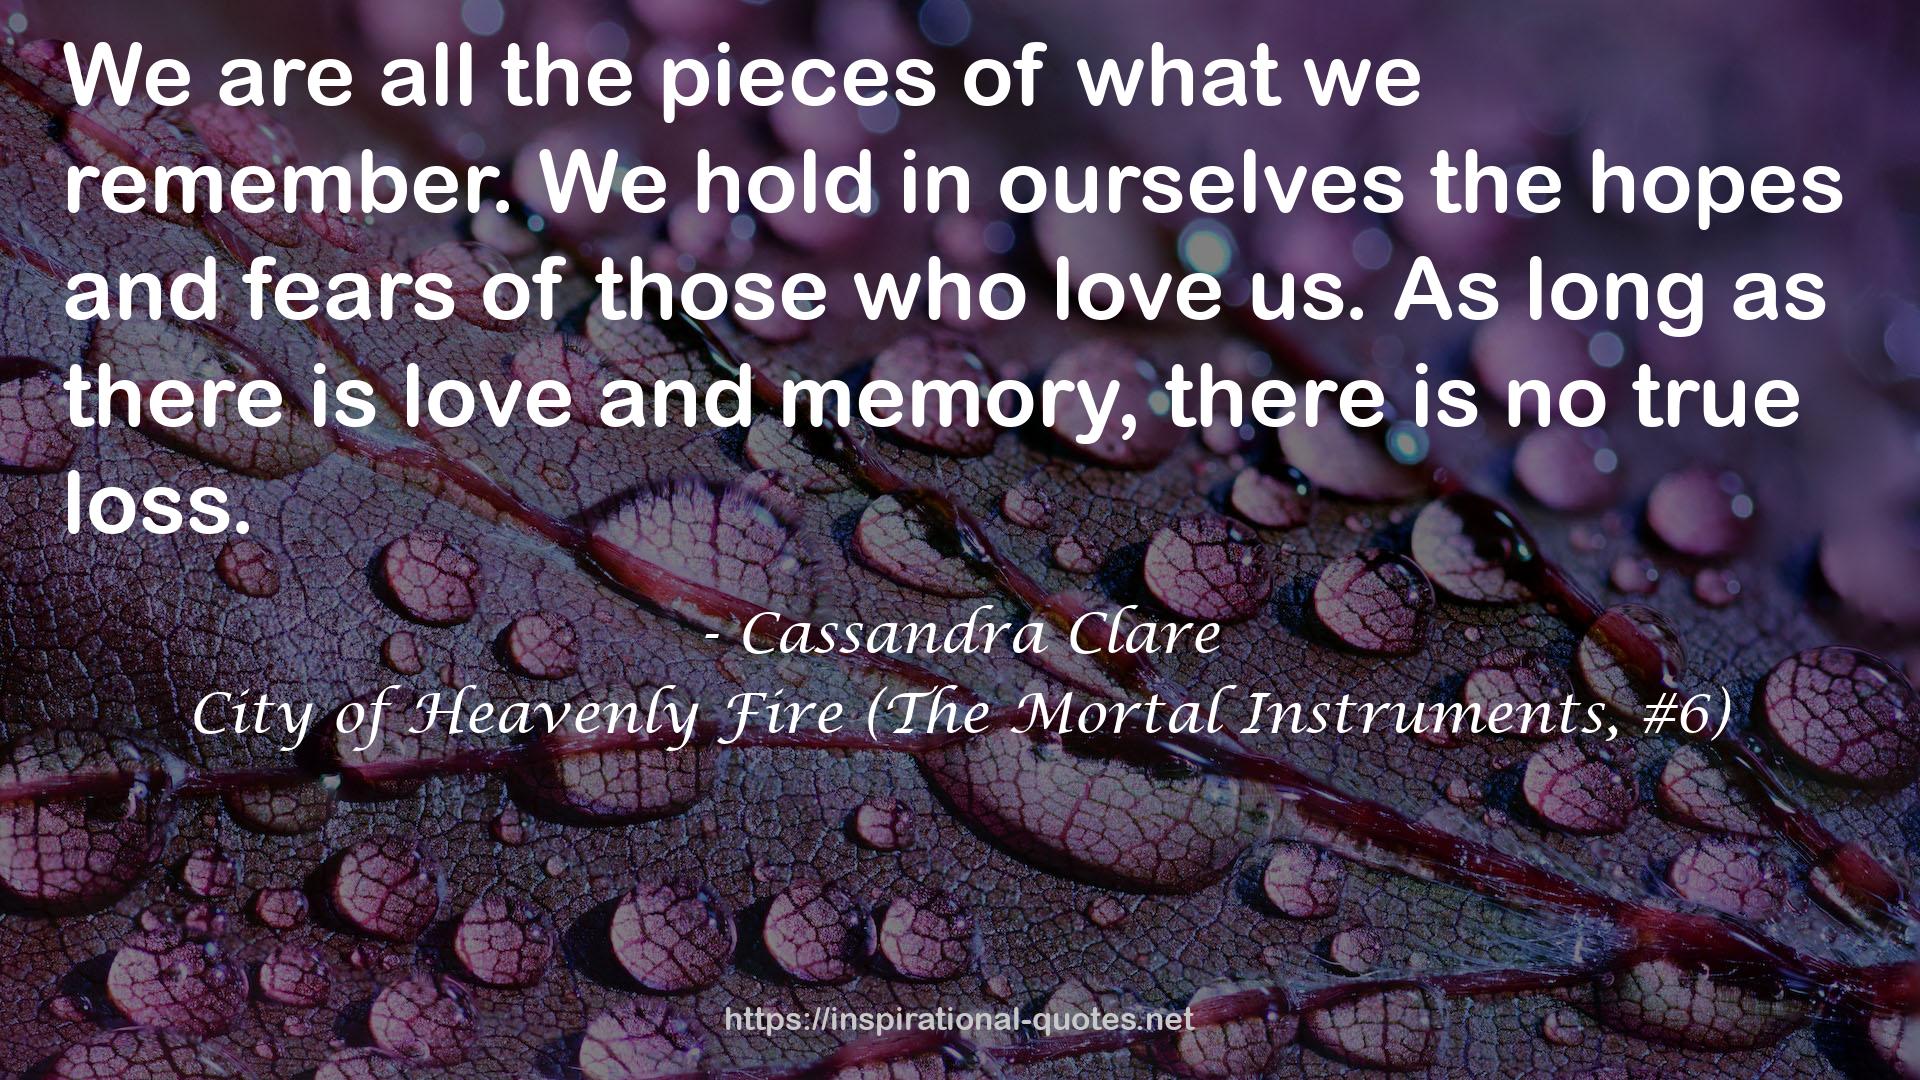 City of Heavenly Fire (The Mortal Instruments, #6) QUOTES